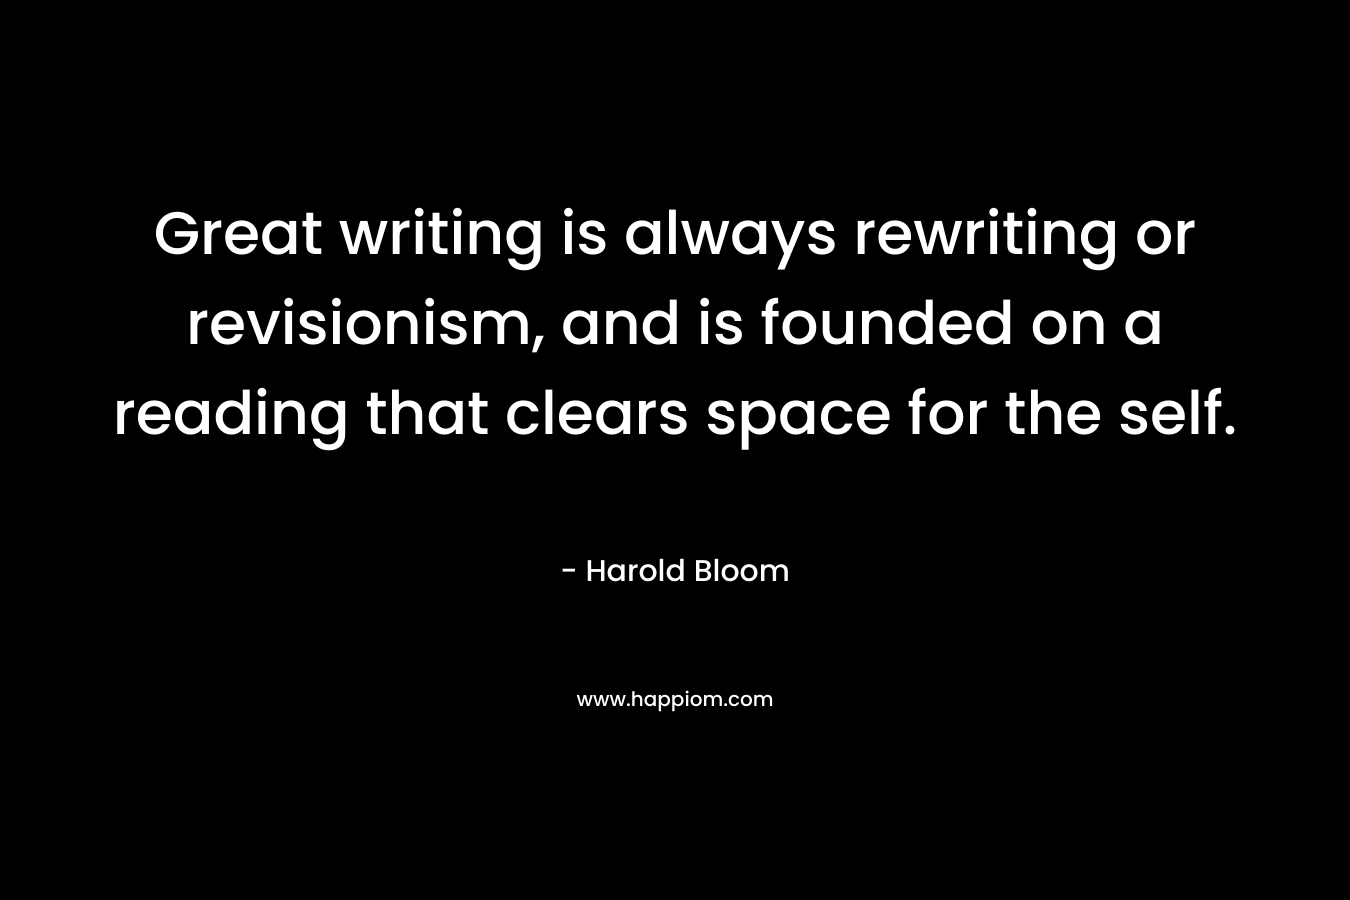 Great writing is always rewriting or revisionism, and is founded on a reading that clears space for the self.